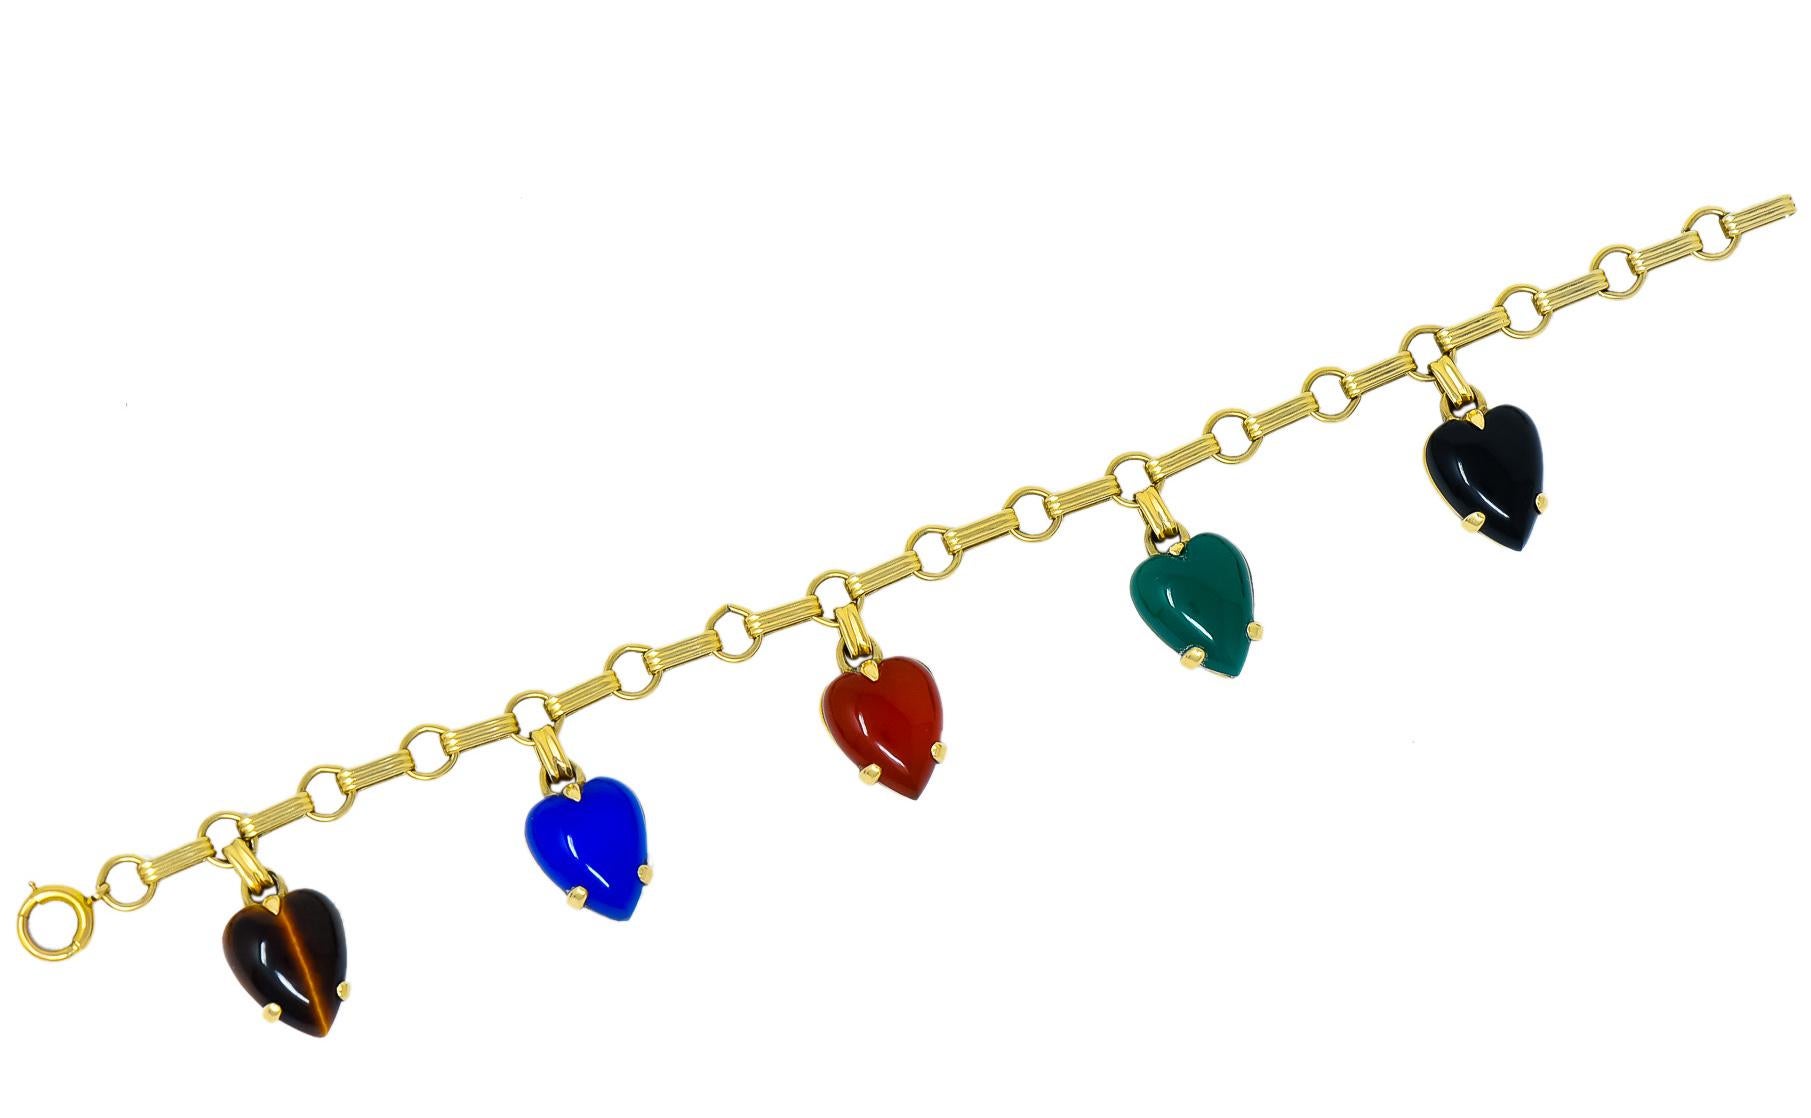 Bracelet designed with ribbed elongated links and round spacer links

With carved heart drops measuring approximately 11.4 x 10.2 mm (slight variation from heart to heart)

Tiger's eye, dyed blue chalcedony, carnelian, chrysoprase, and onyx, opaque